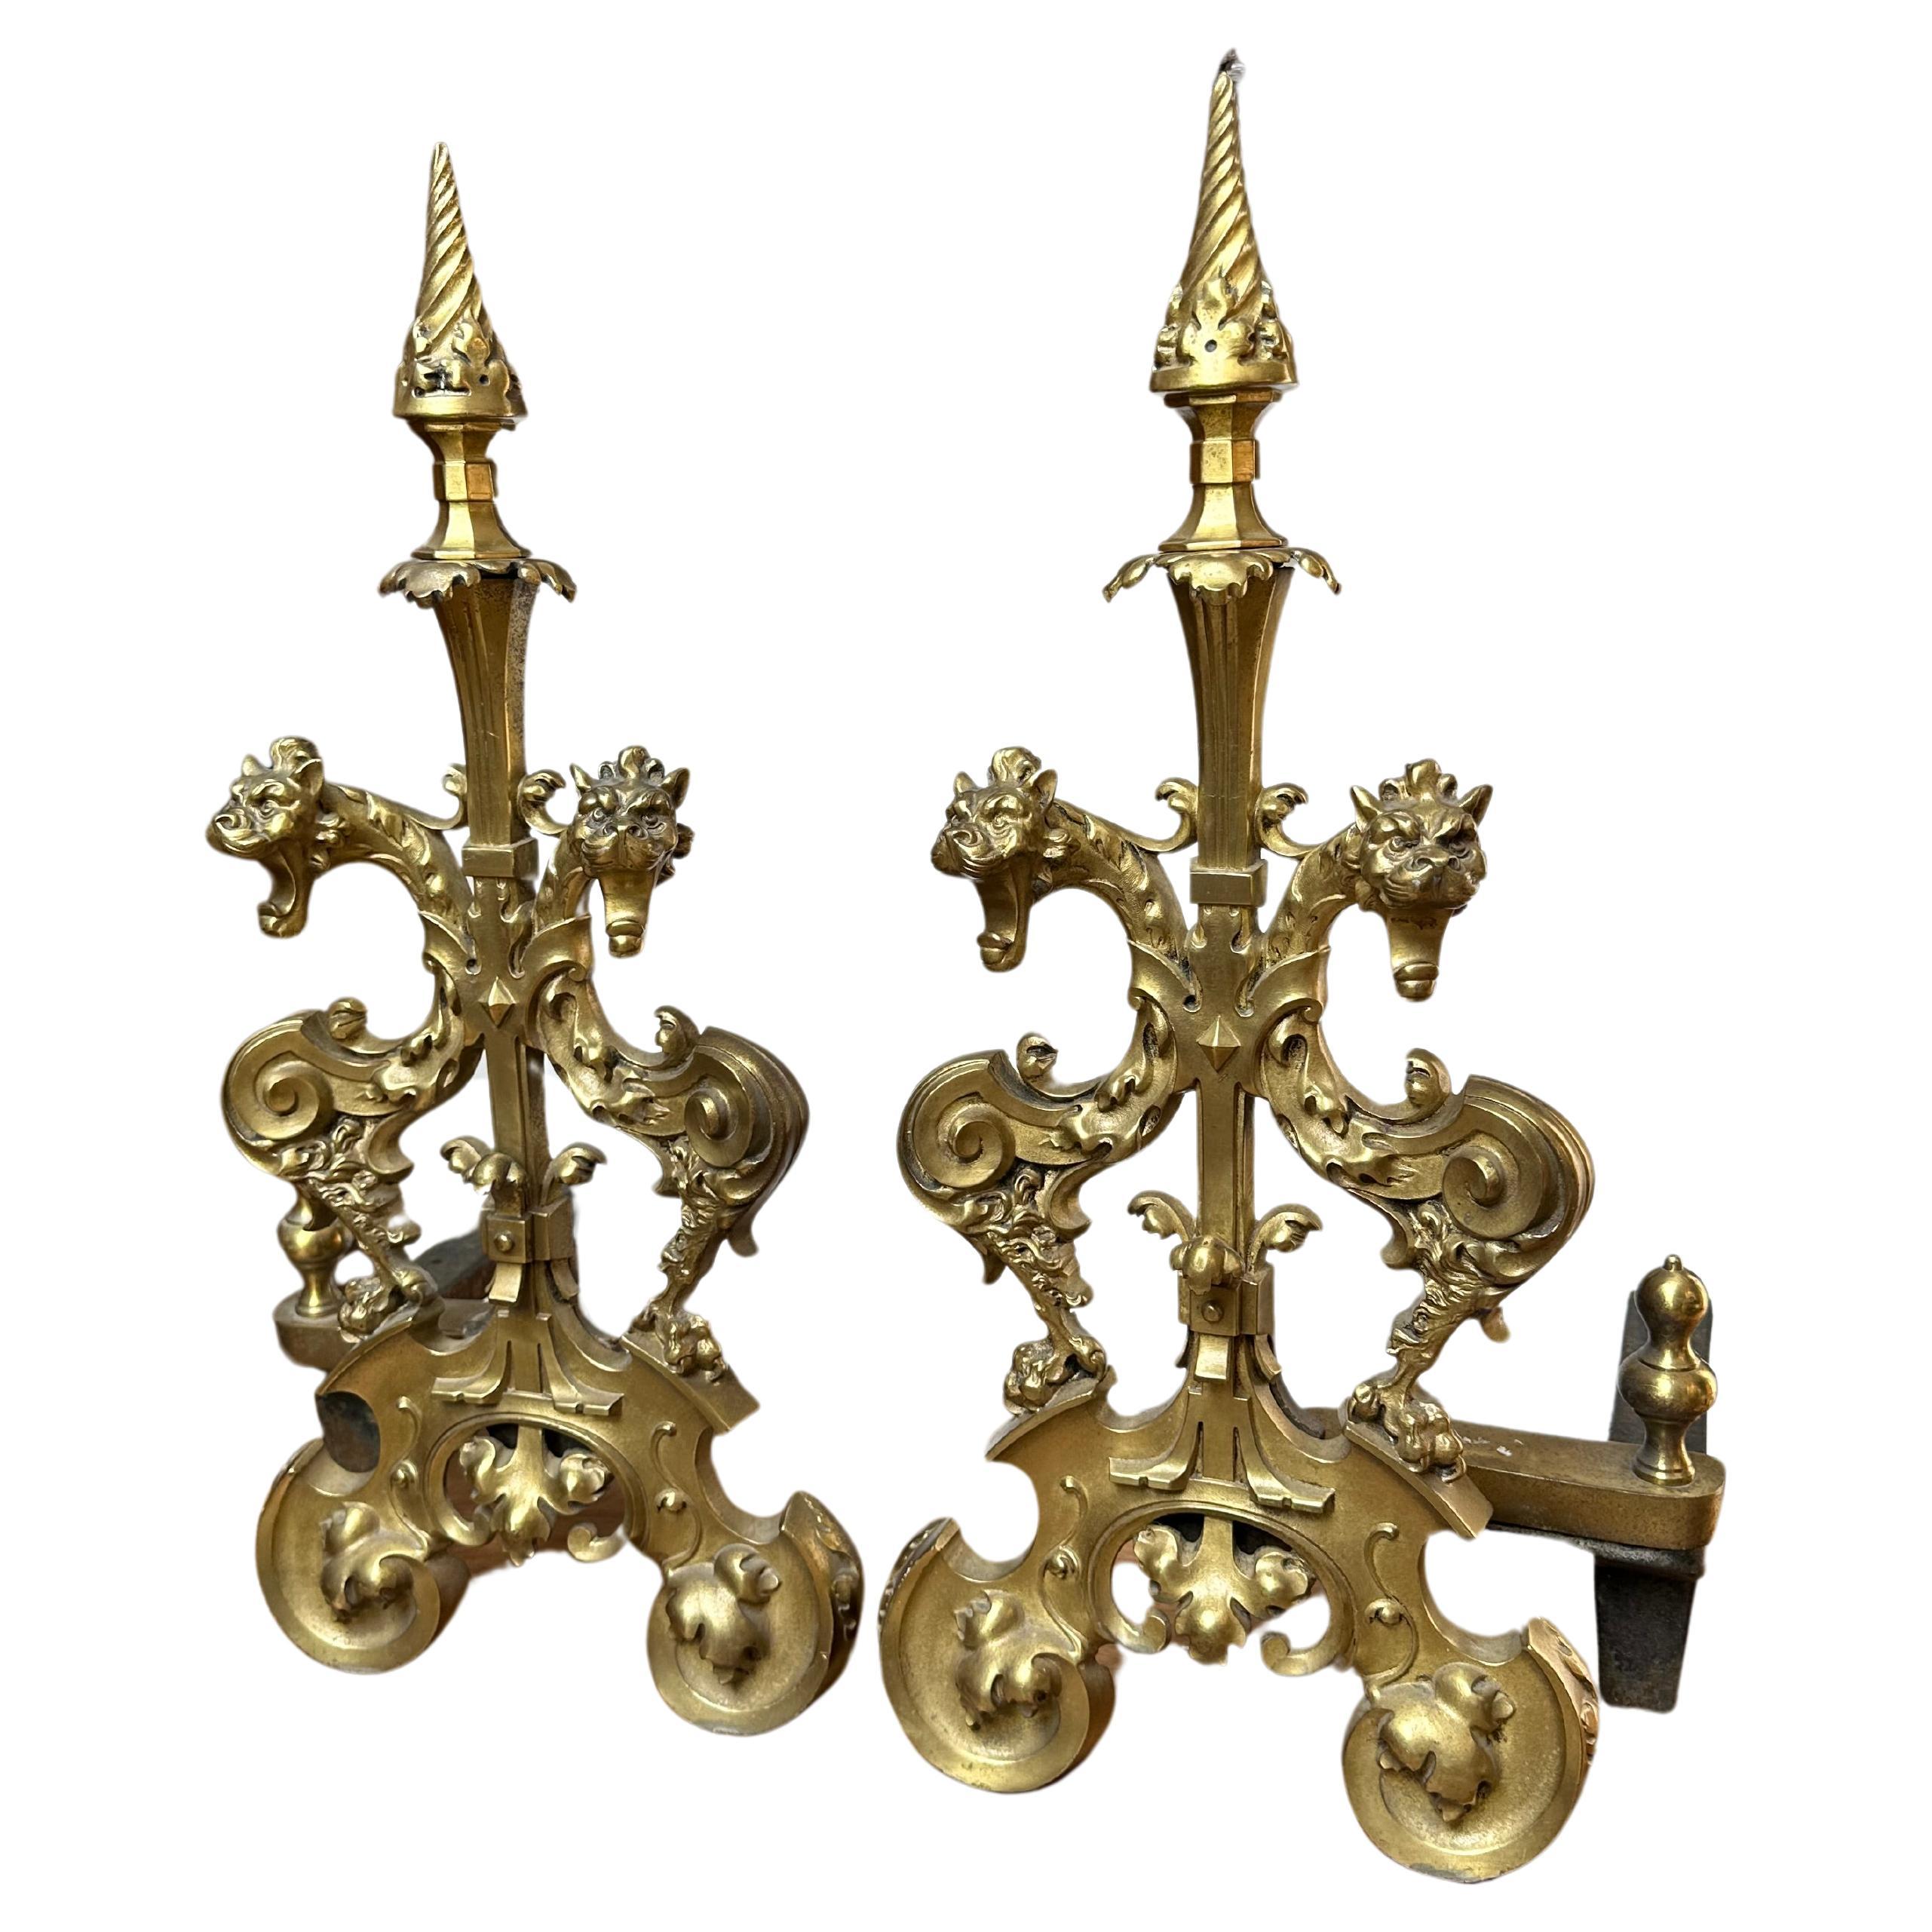 Antique Gothic Revival Gilt Bronze Dragon Andirons or Firedogs / Fireplace Tools